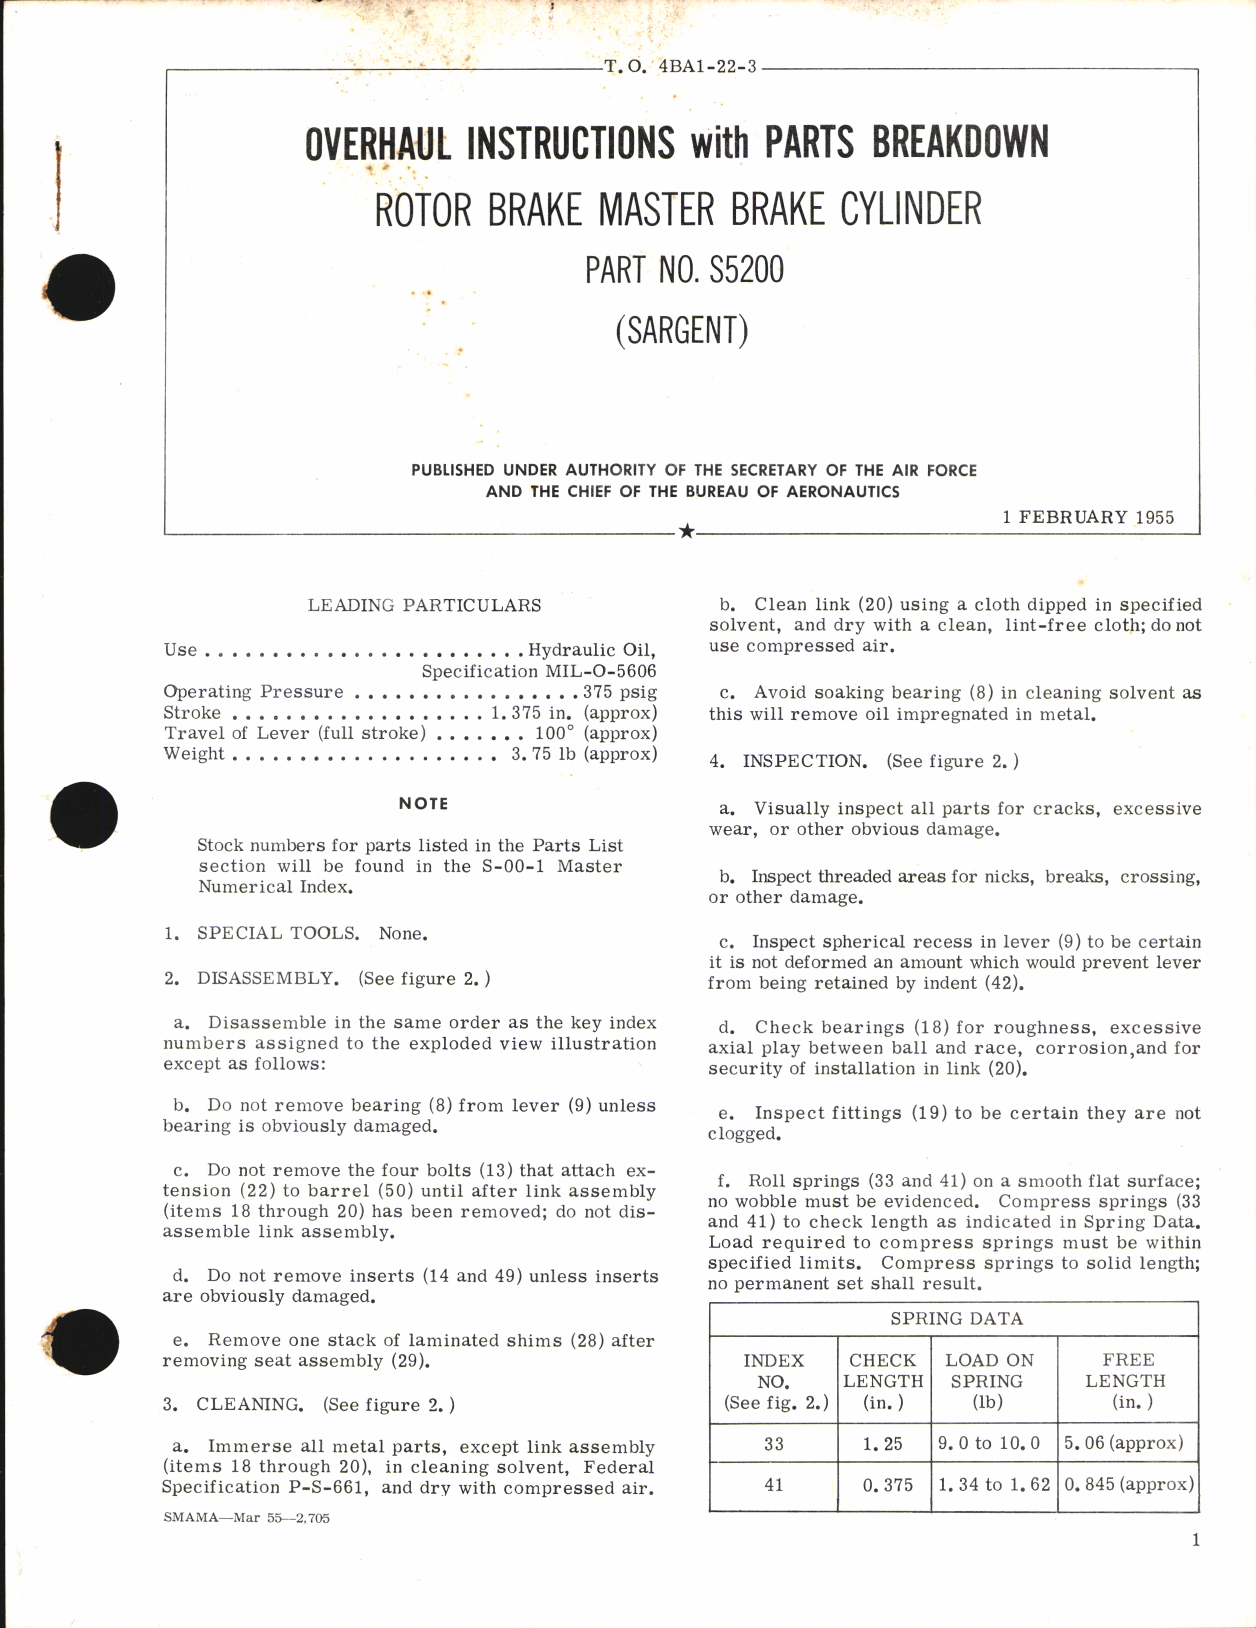 Sample page 1 from AirCorps Library document: Overhaul Instructions with Parts Breakdown for Rotor Brake Master Brake Cylinder